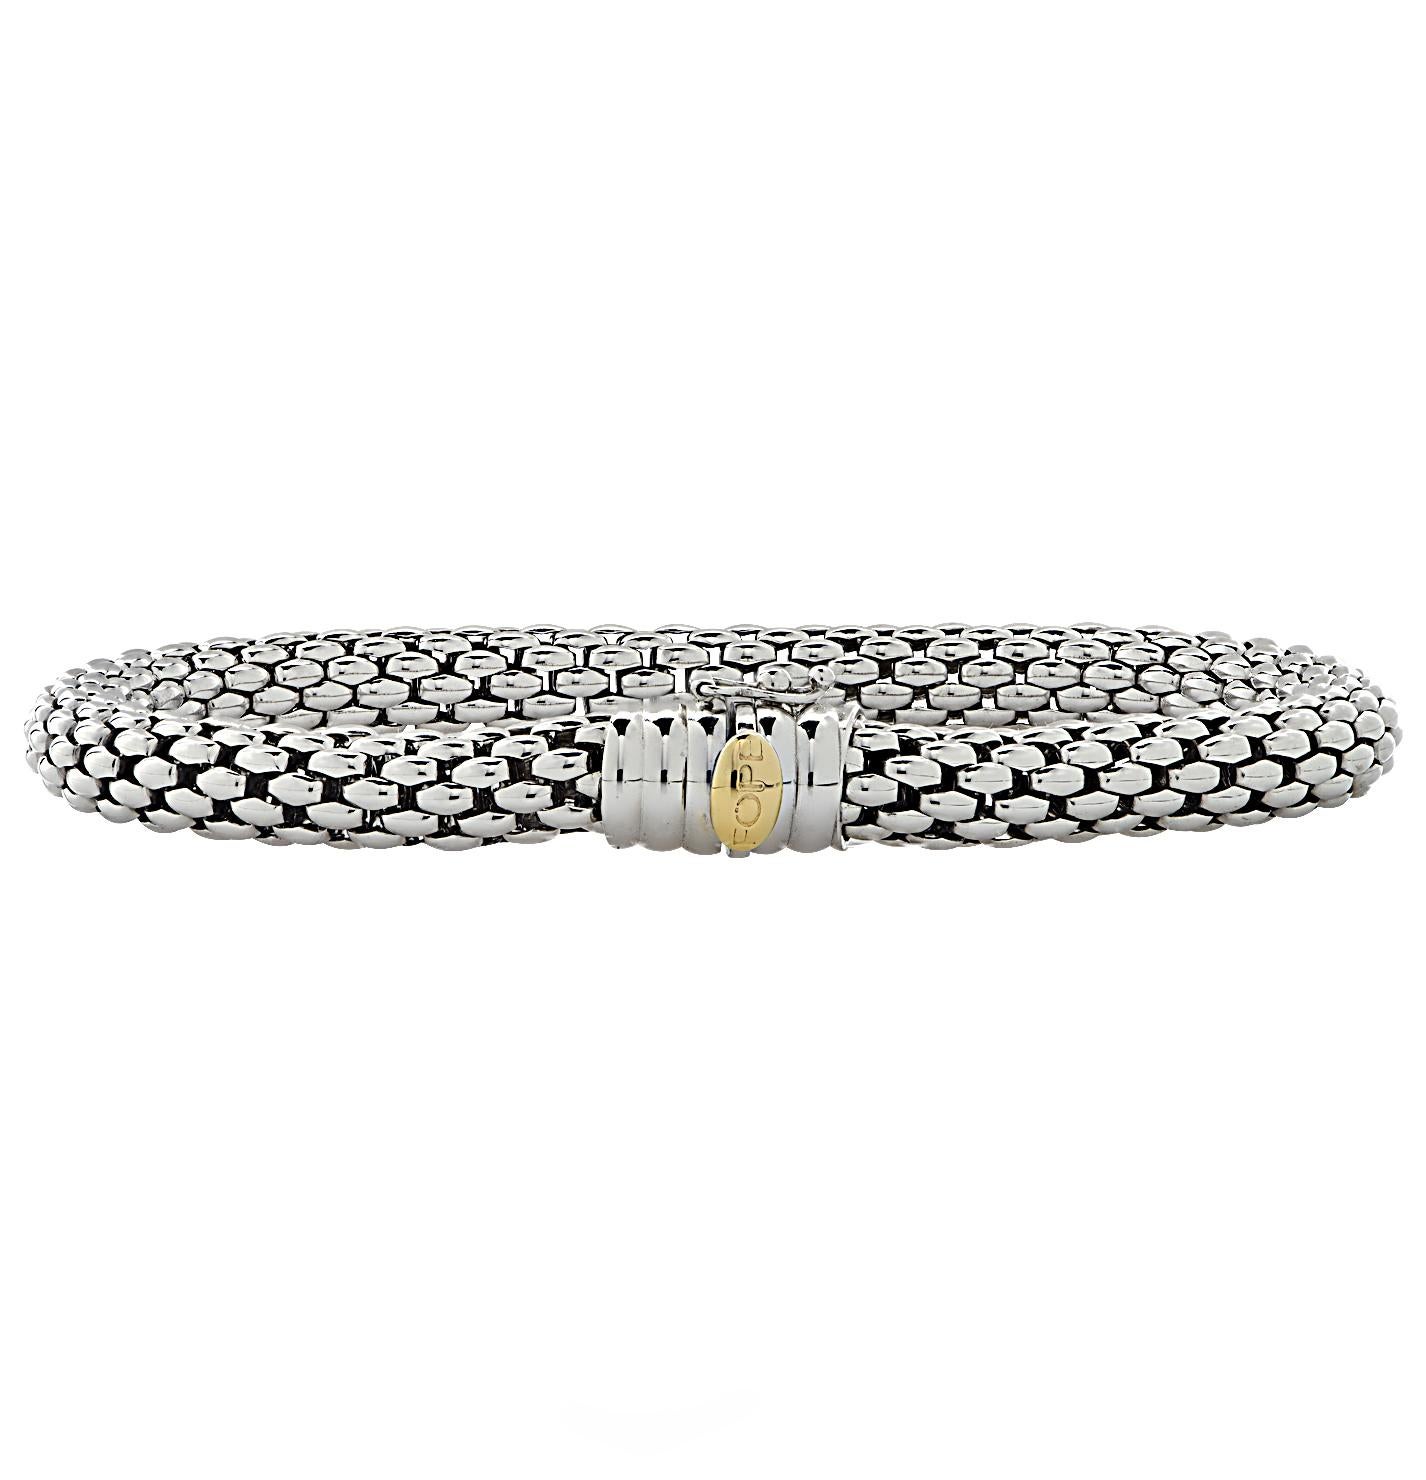 Fope Flex ‘it bracelet crafted by hand in Italy in 18 karat white gold with a yellow gold detail. This stunning woven white gold flexible tube bracelet detailed with rondelles glides around the wrist wrapping it in luxury and sophistication